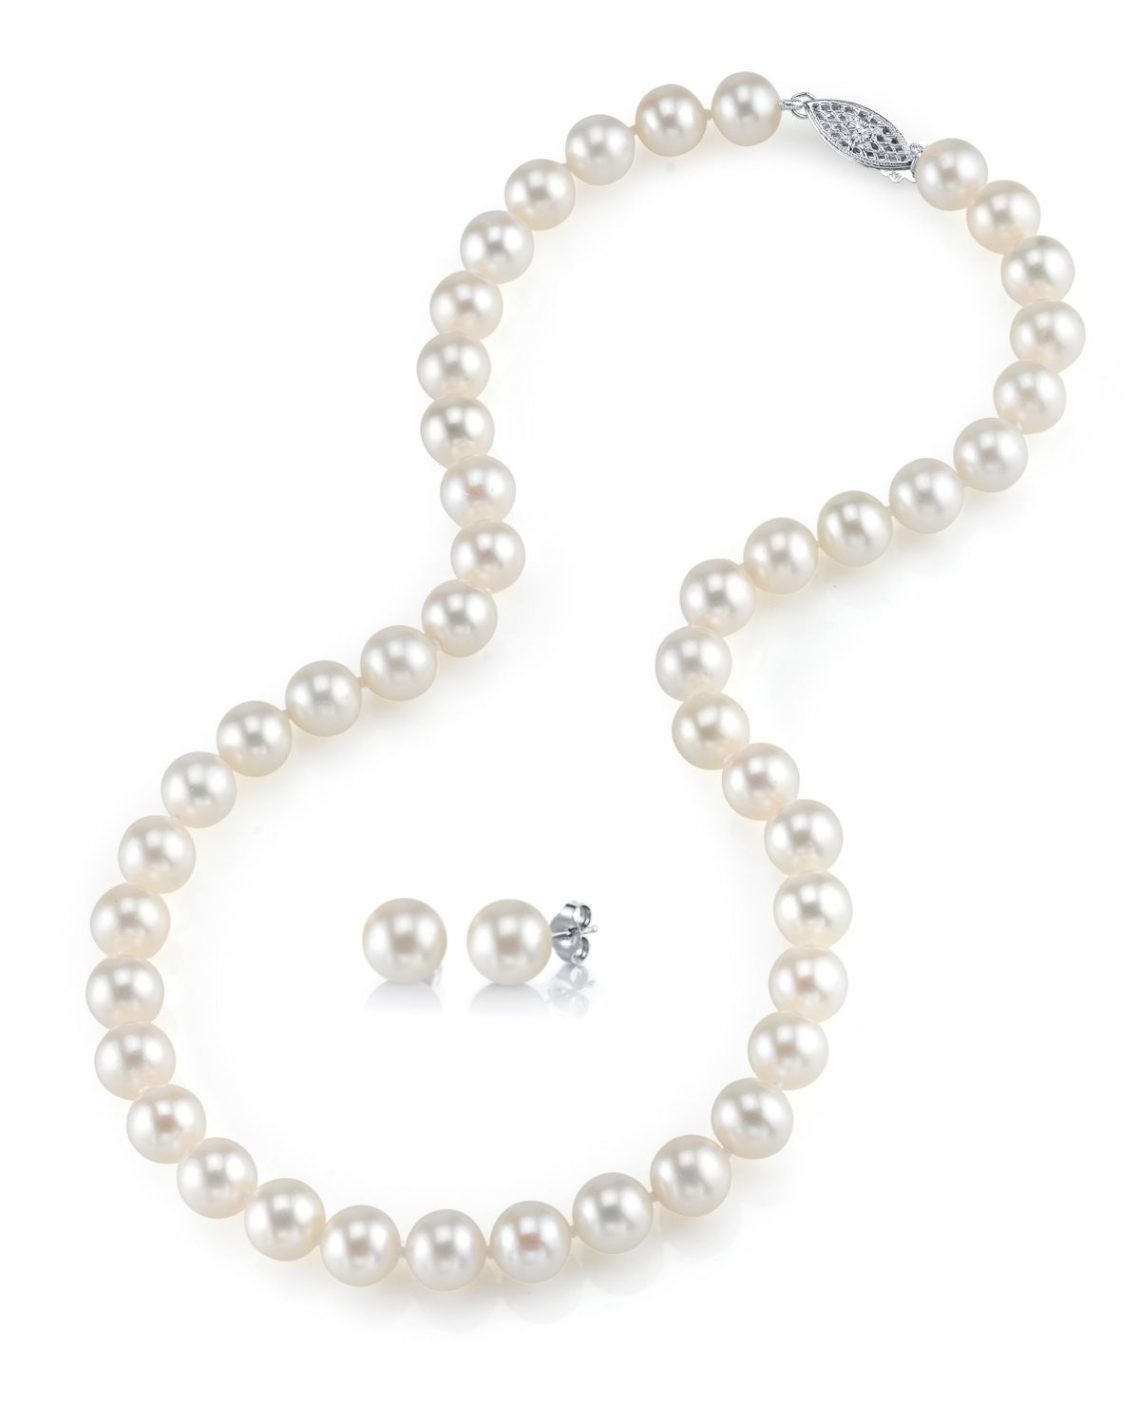 Shopping Guide: 5 Tips on Buying Pearls Online - TPS Blog